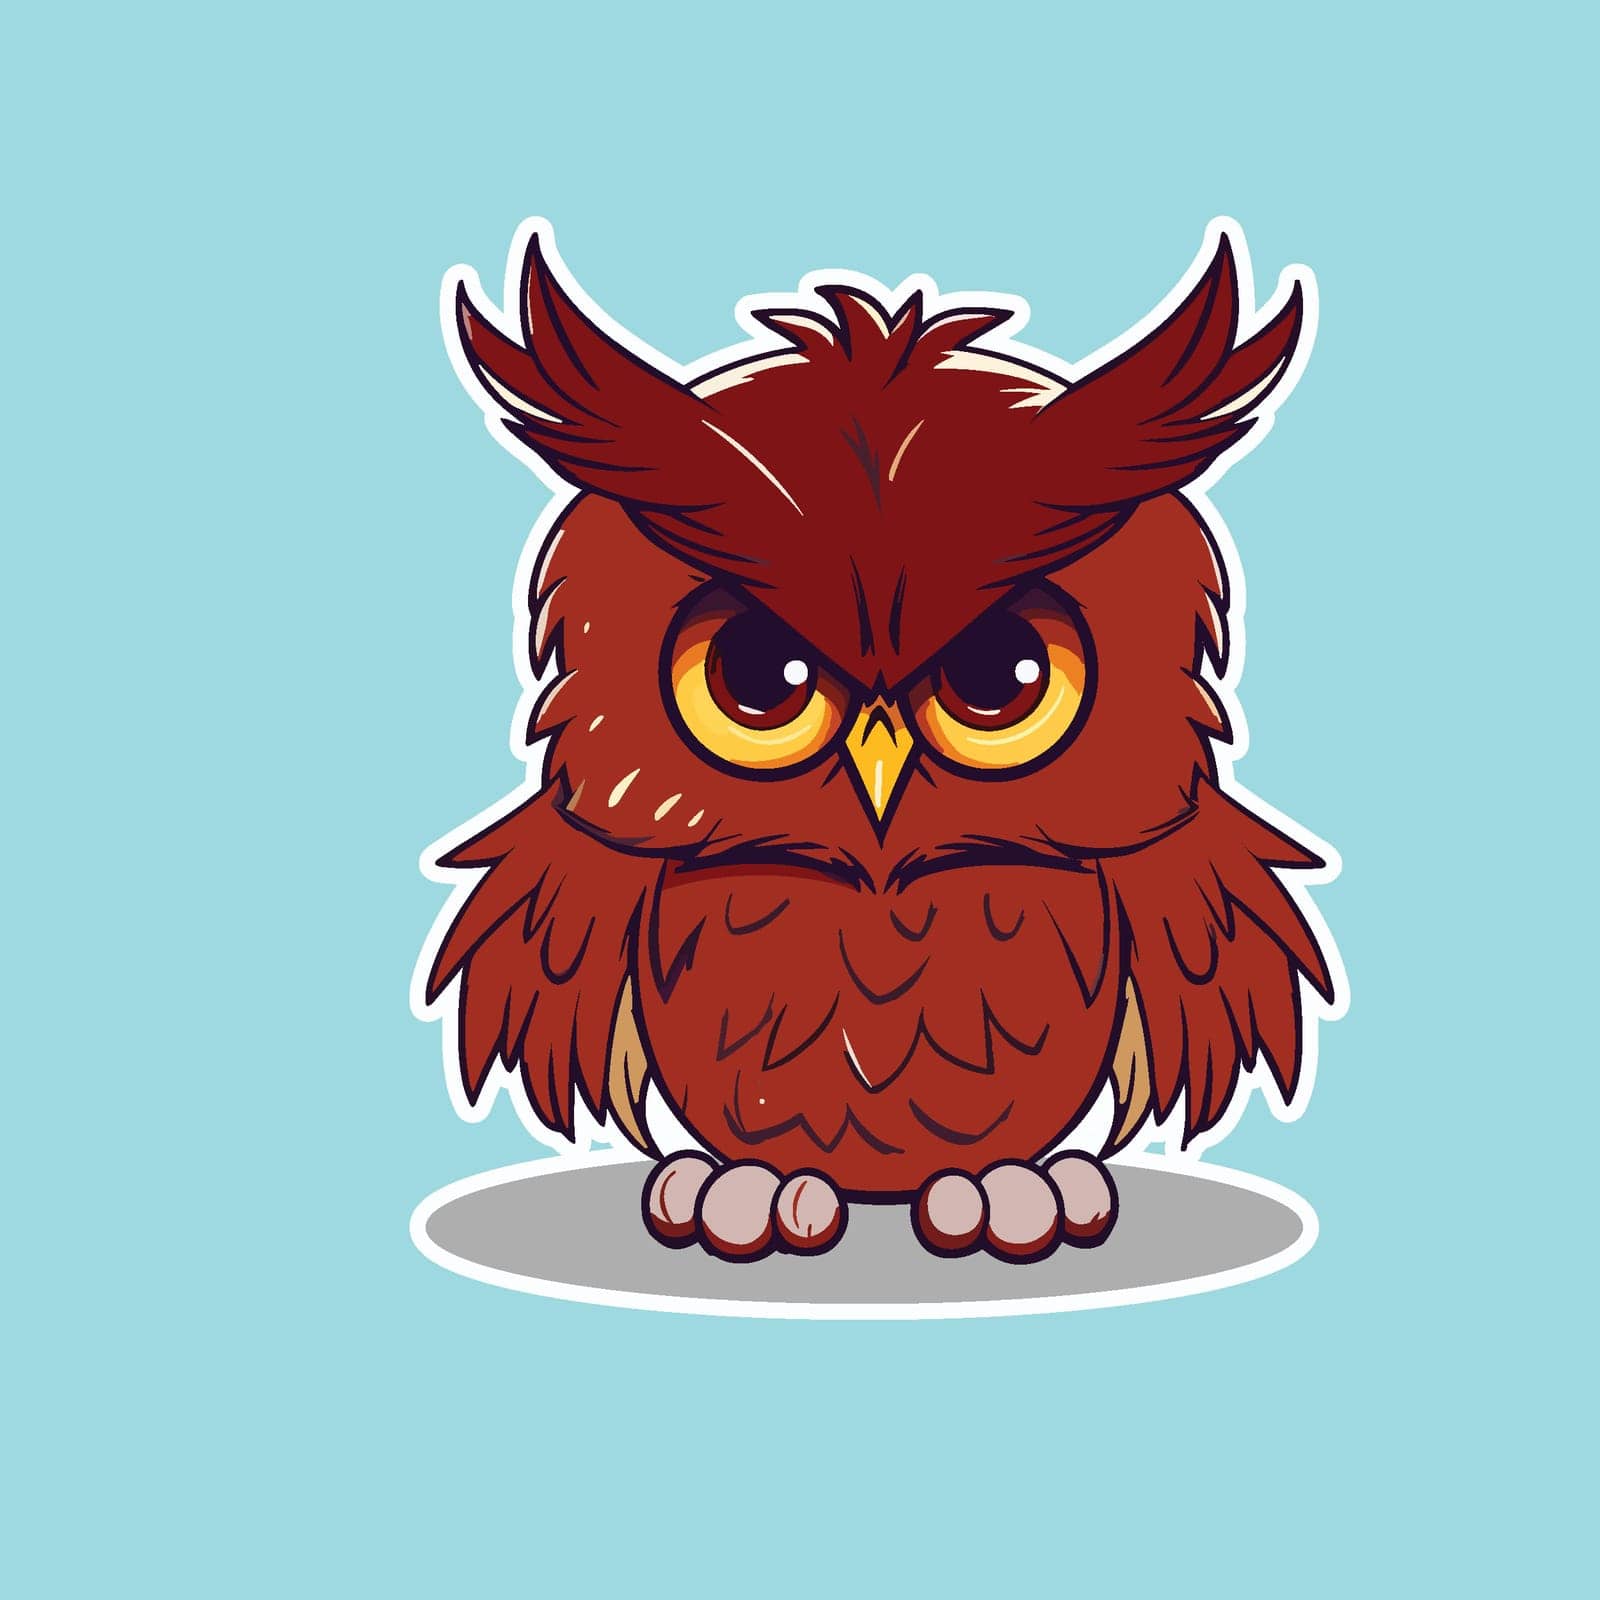 Red Owl Sticker on blue background by Vinhsino